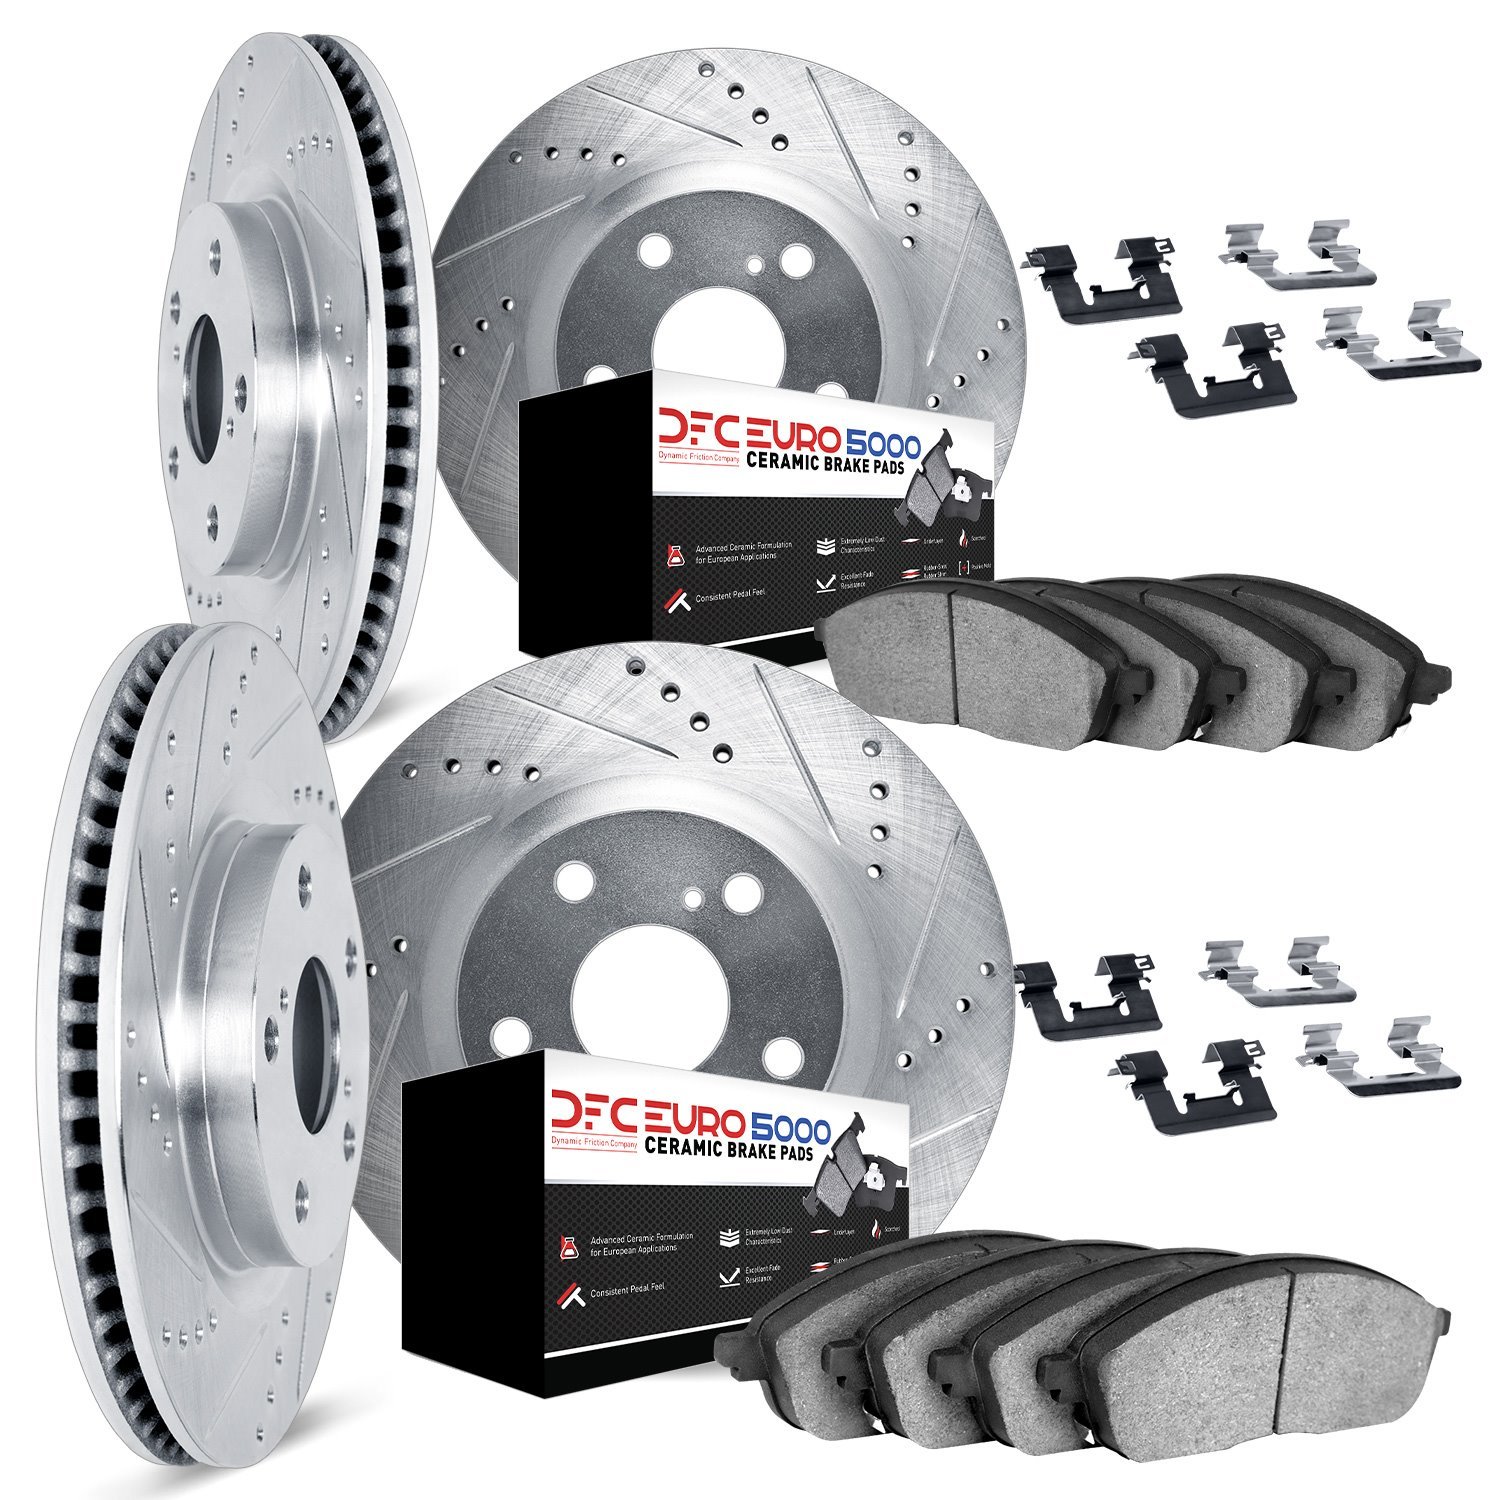 7614-31006 Drilled/Slotted Brake Rotors w/5000 Euro Ceramic Brake Pads Kit & Hardware [Silver], 1988-1994 BMW, Position: Front a